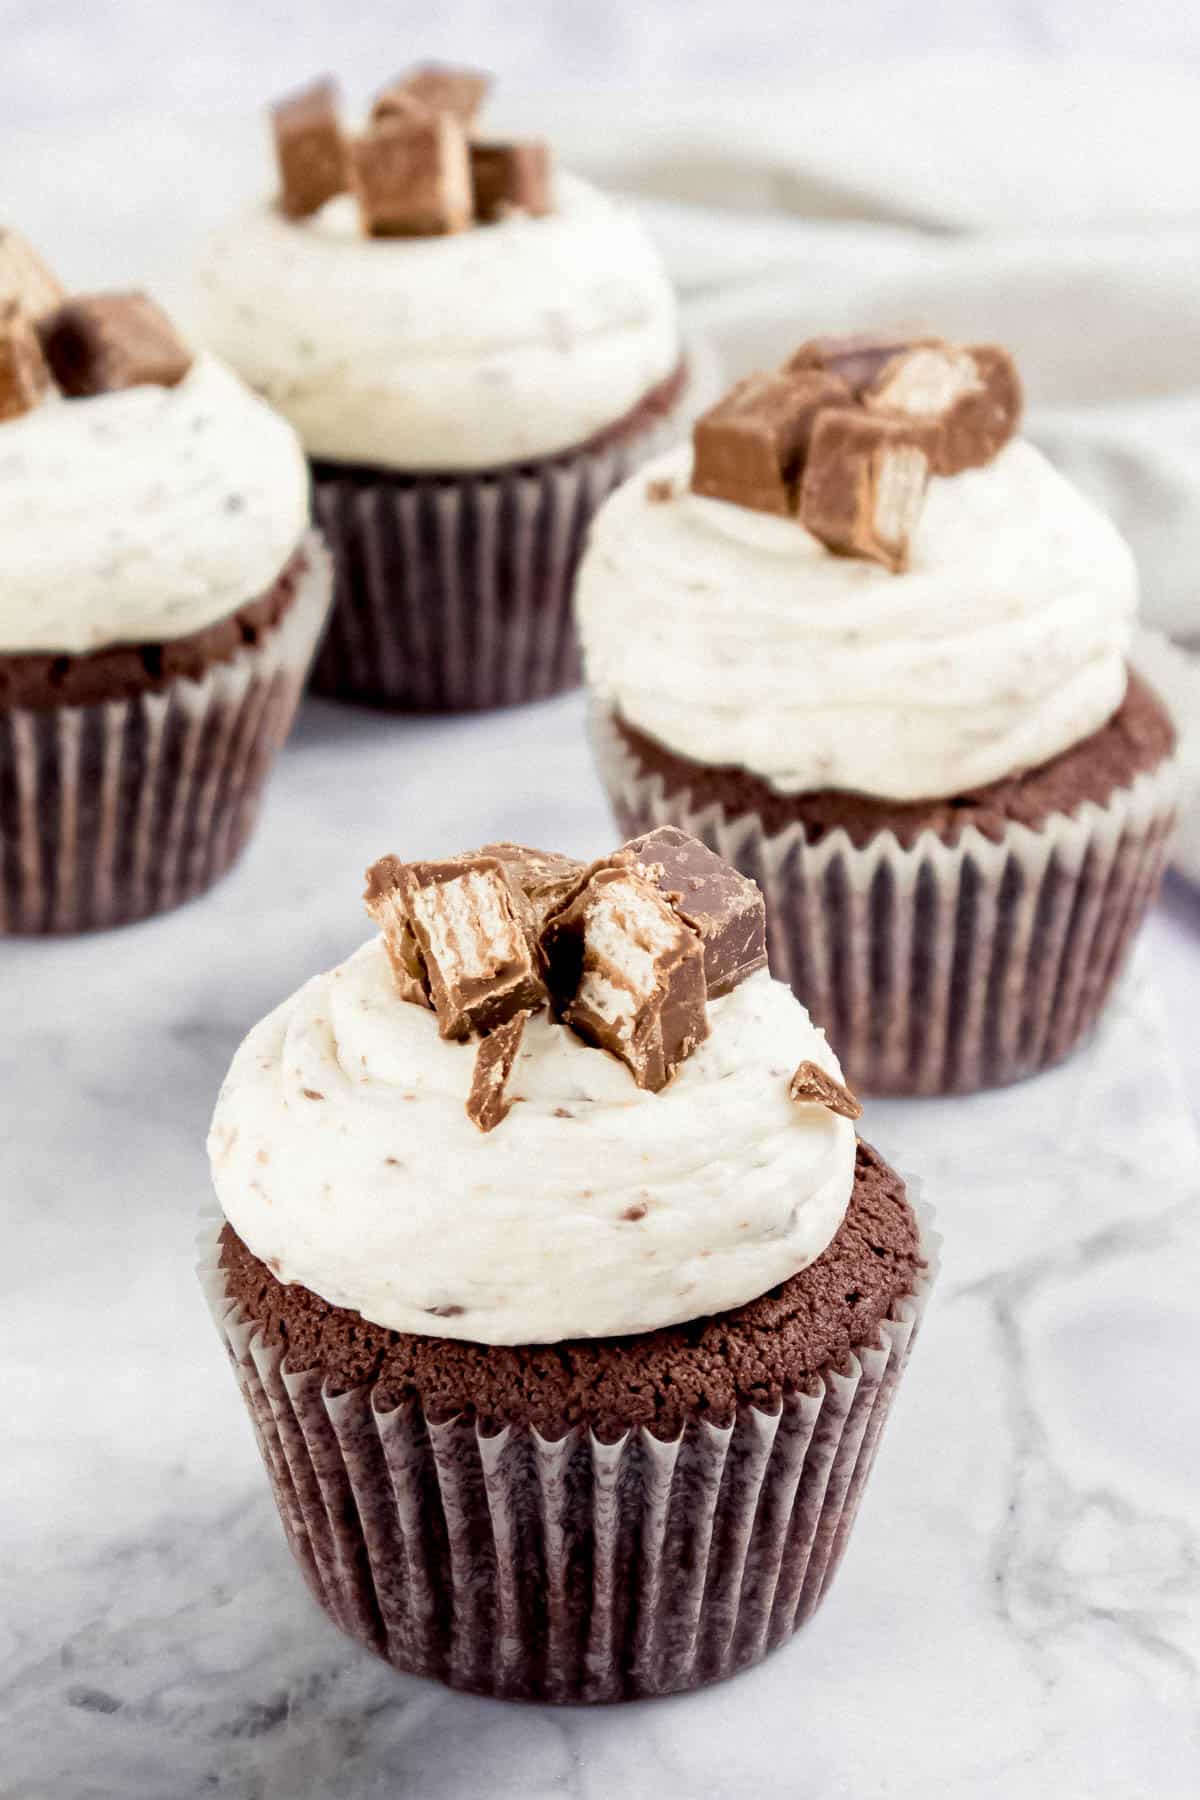 Chocolate cupcakes topped with vanilla buttercrean and Kit Kat pieces